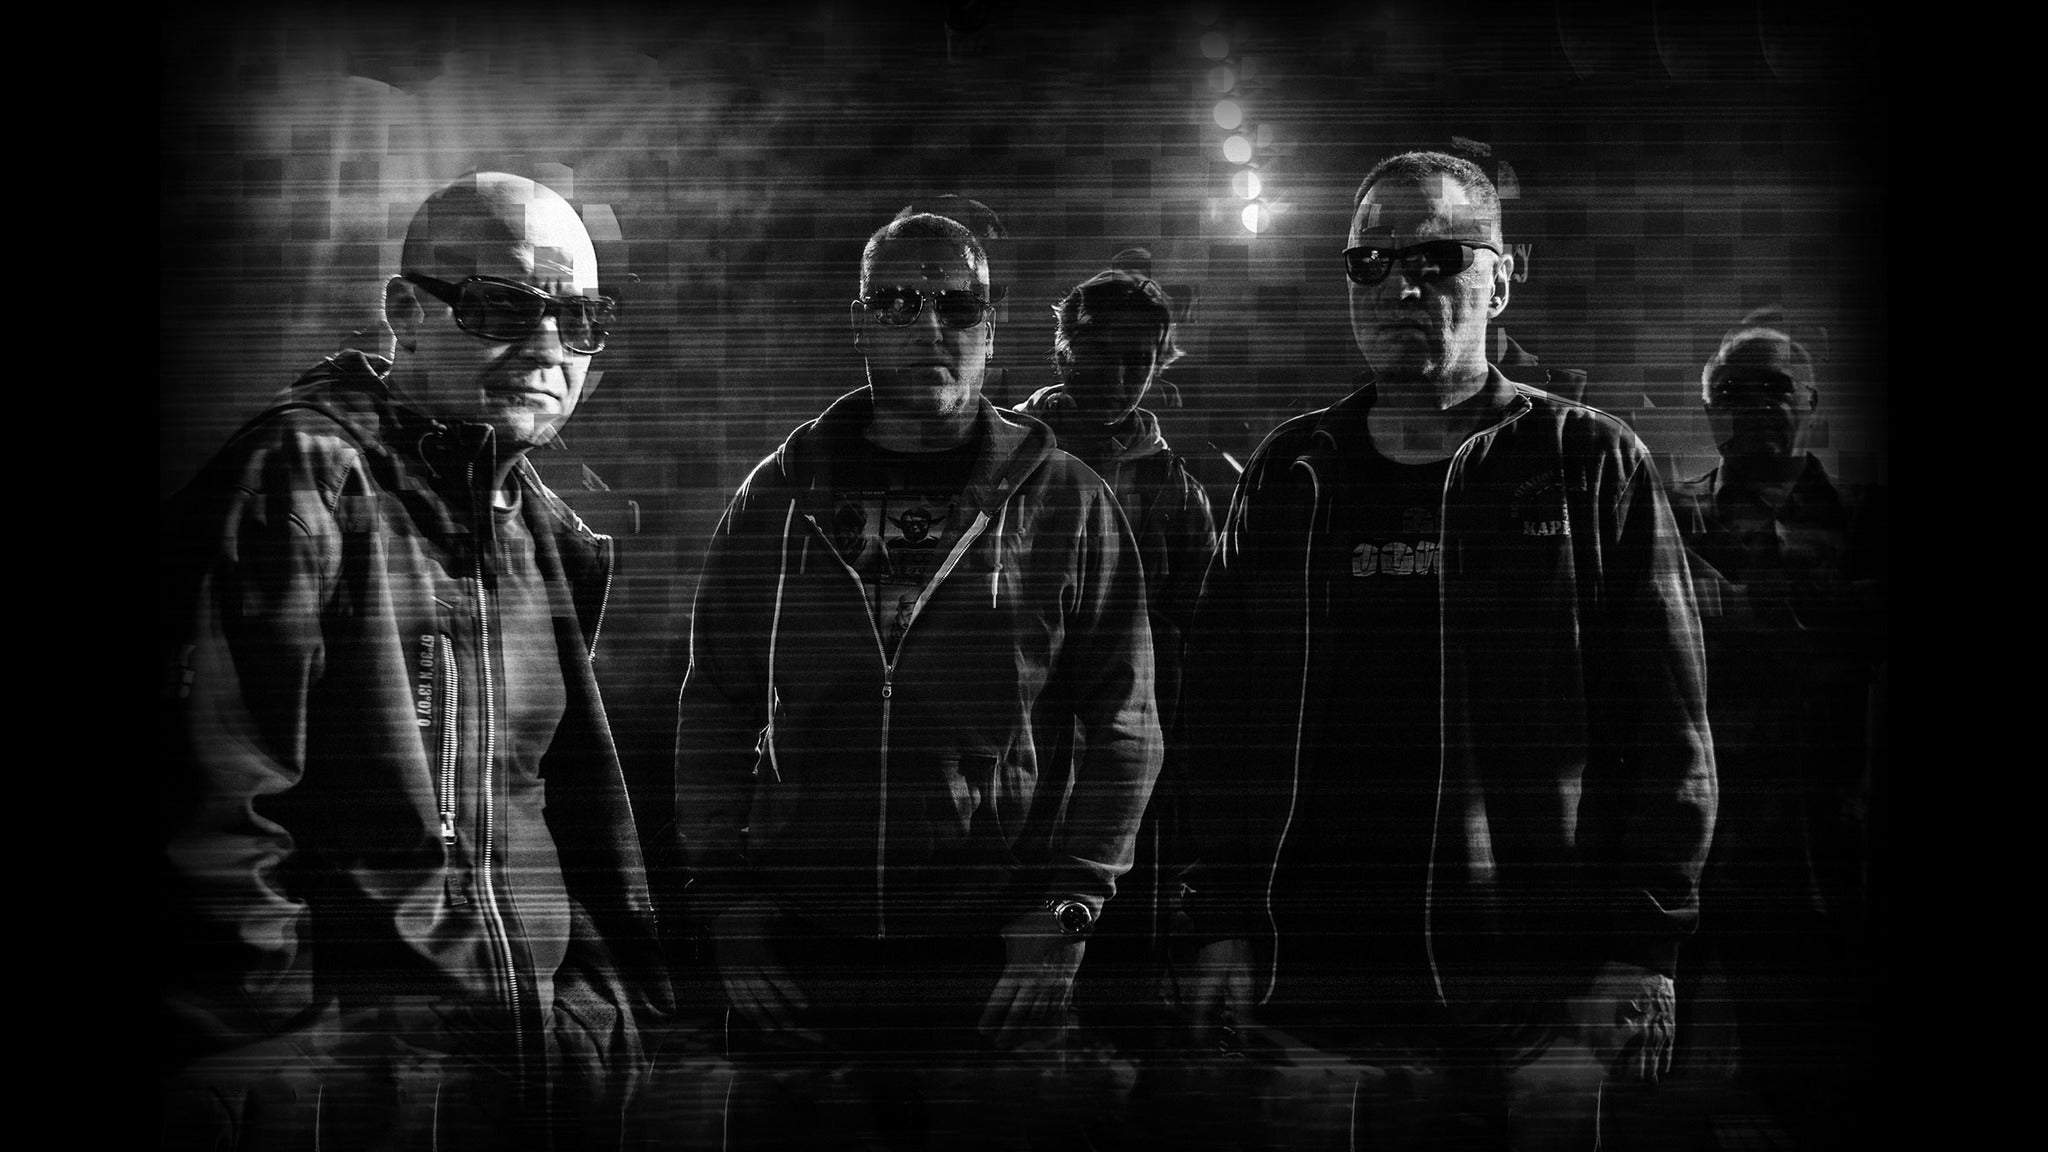 Front 242 with special guests Severed Heads in New York promo photo for Live Nation presale offer code